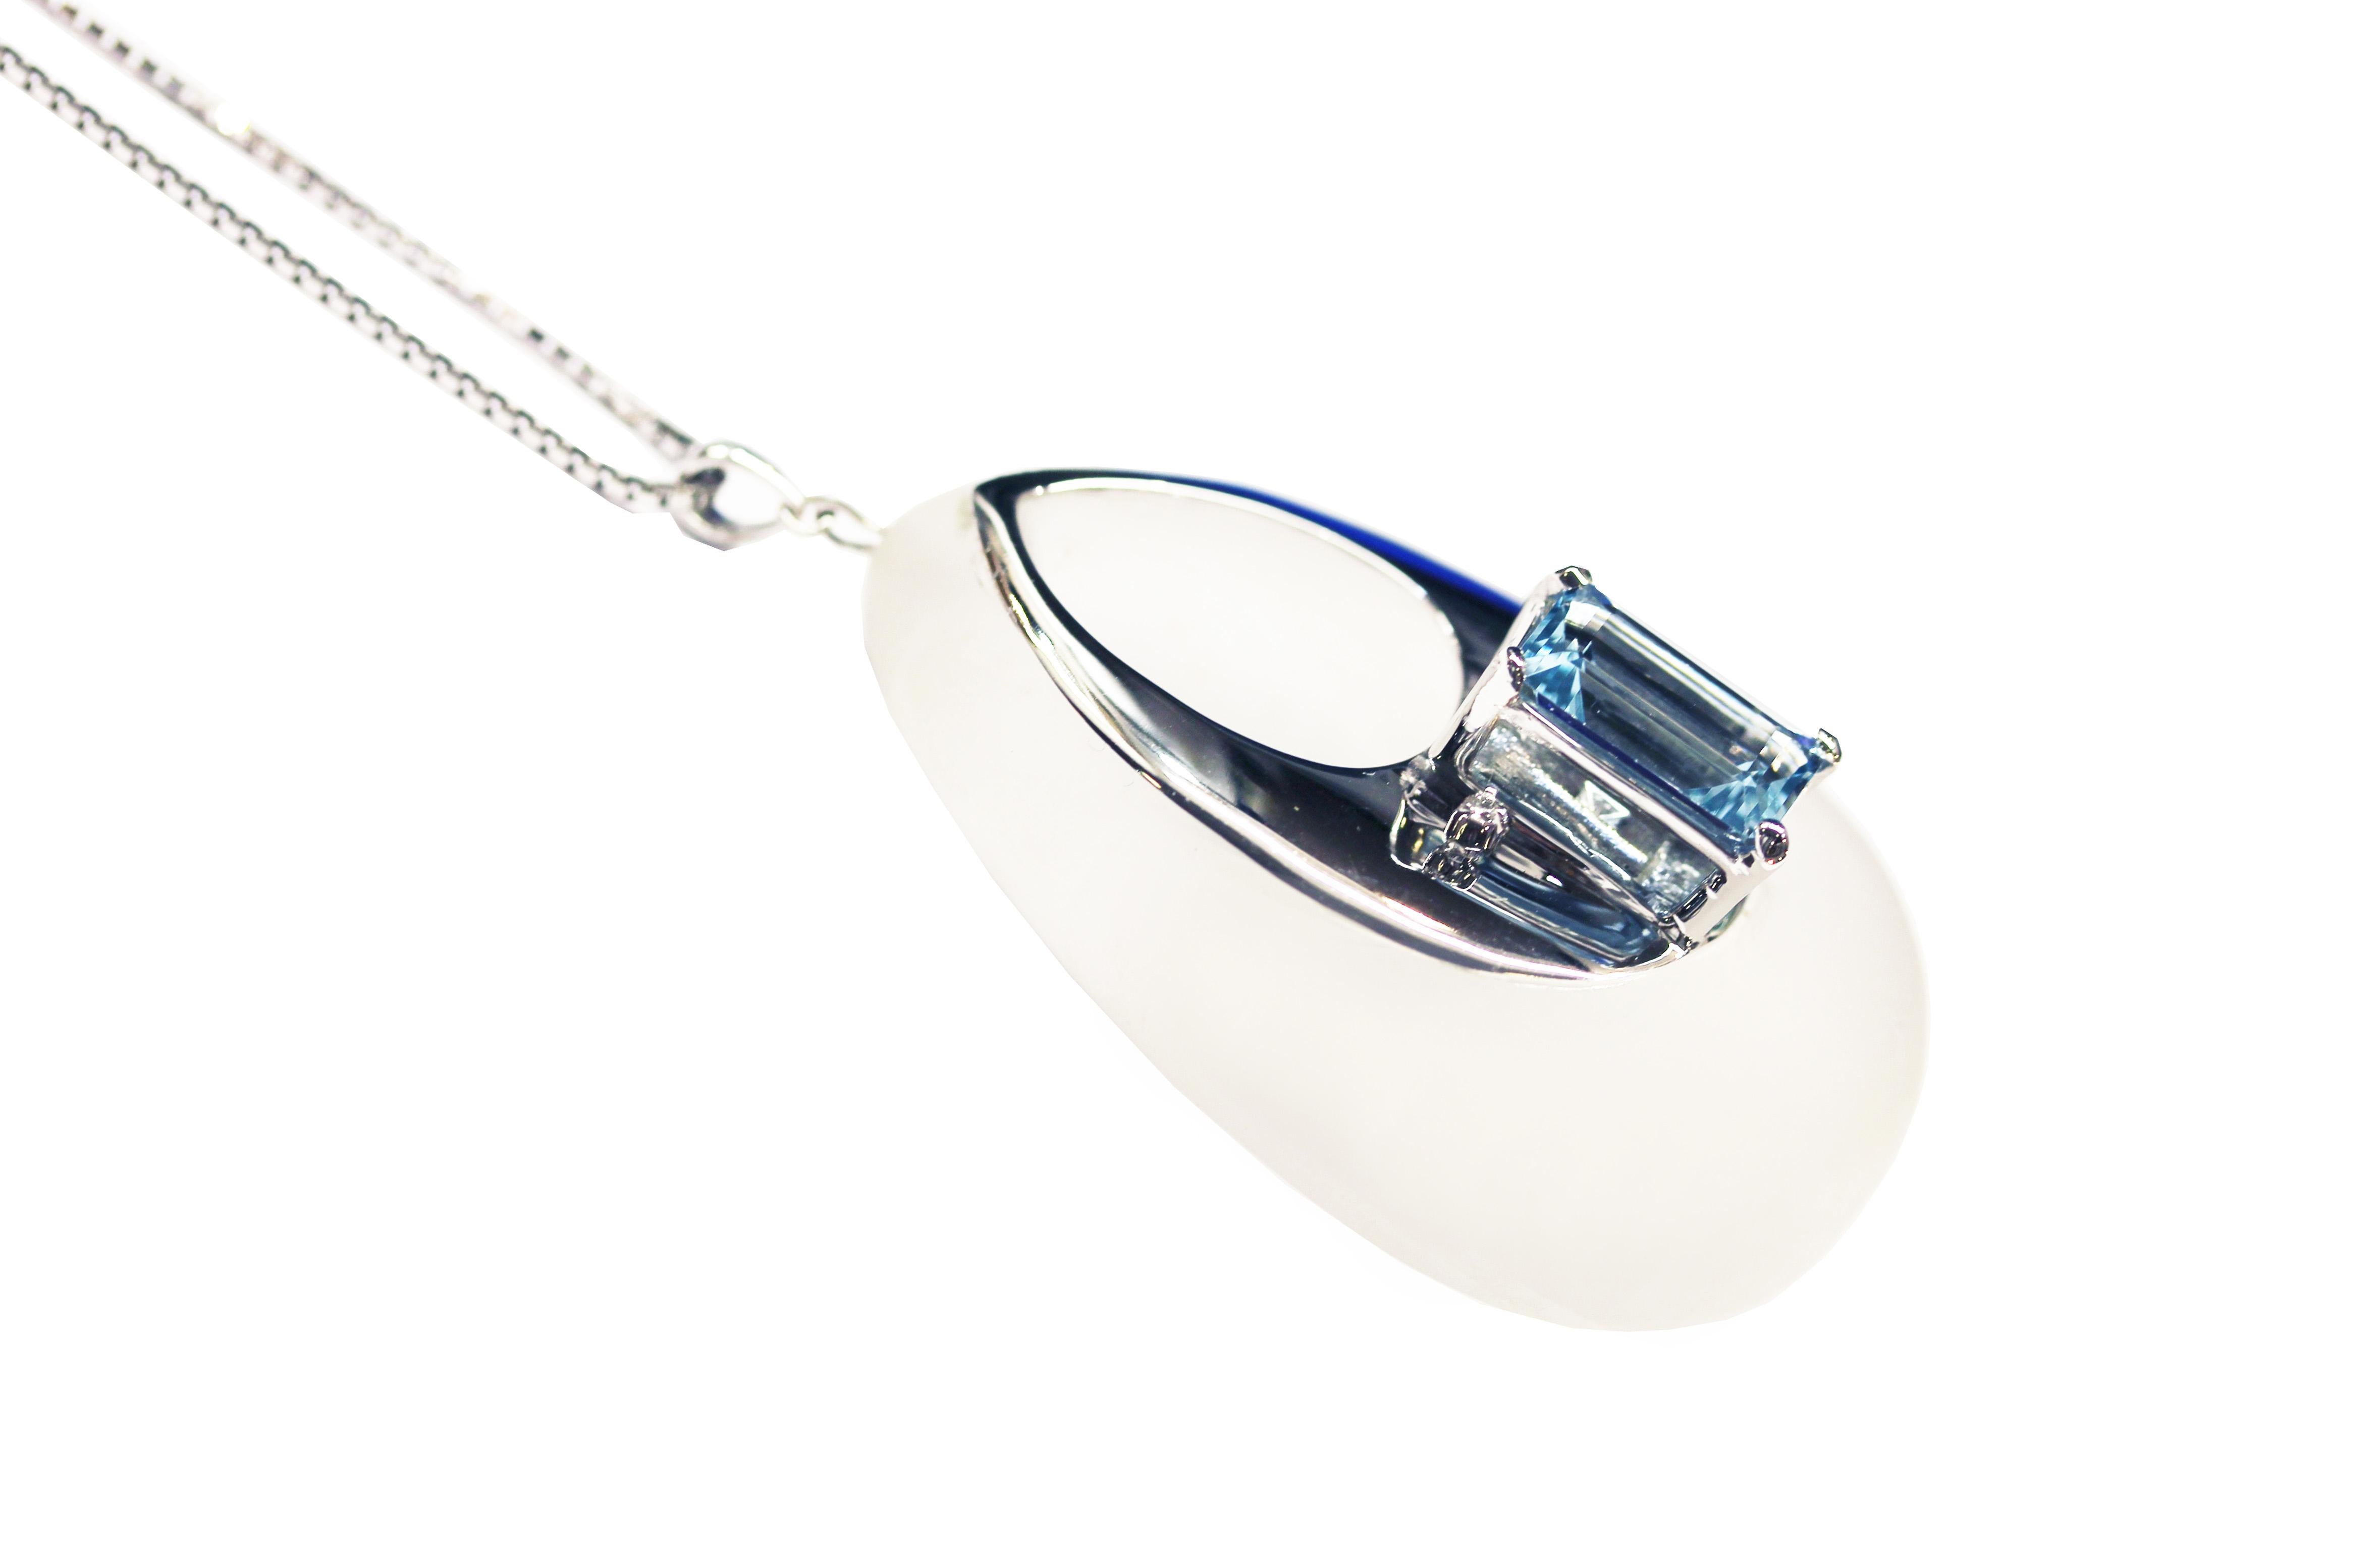 This modern handmade British-London Hallmarked 18 karat white gold pendant necklace, set with hand-carved pear shape rock crystal, 4.23 carat natural aquamarine and diamond is from MAIKO NAGAYAMA's Haute Couture Collection called 